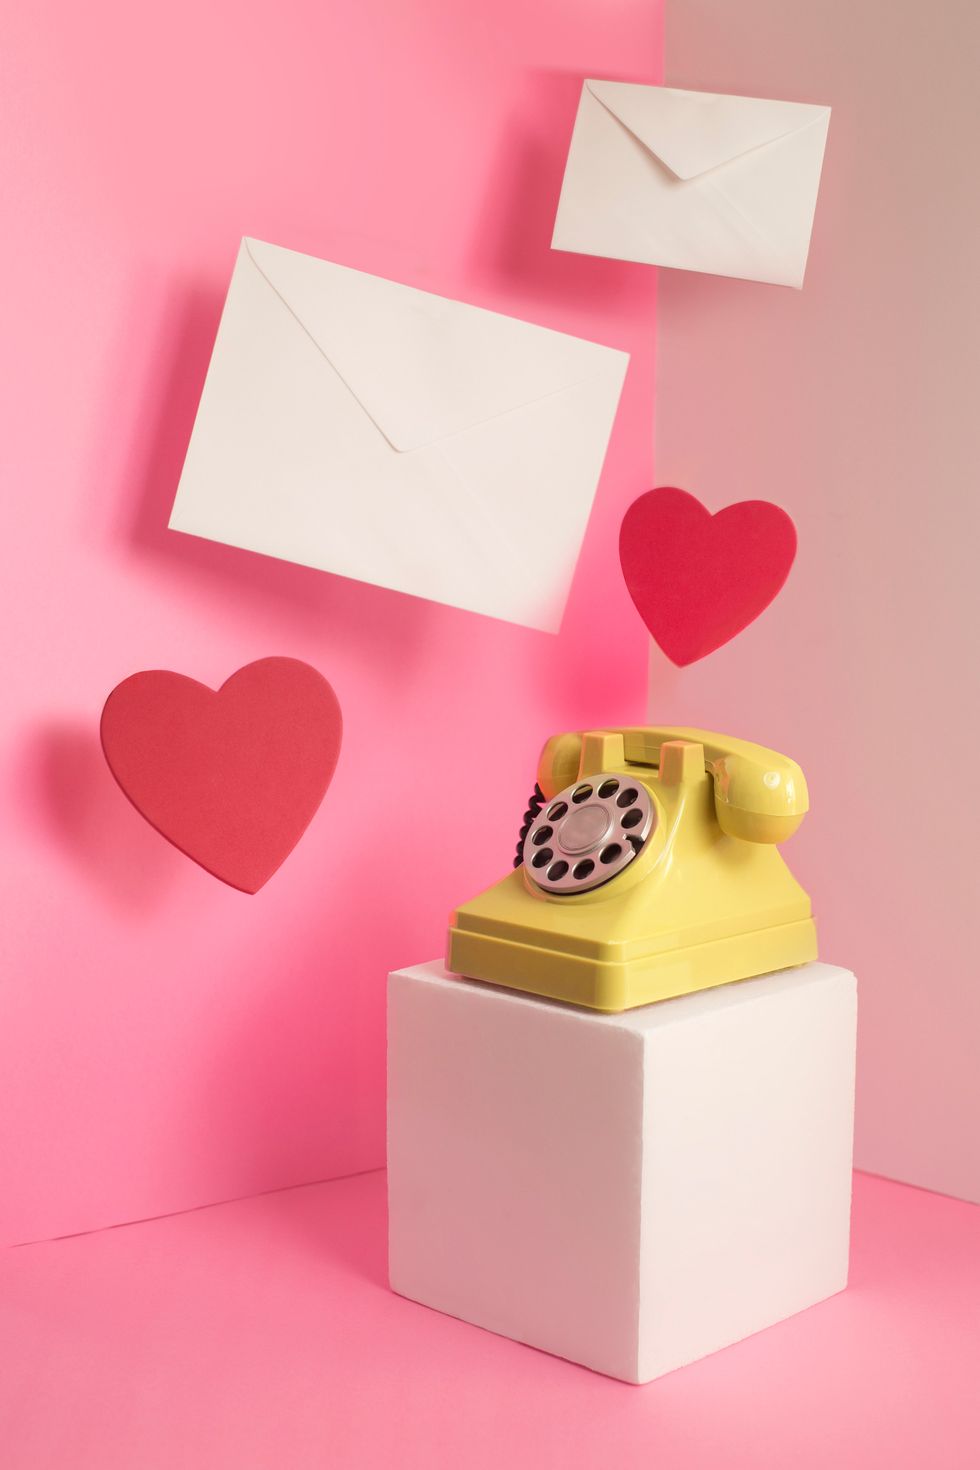 A phone and hearts